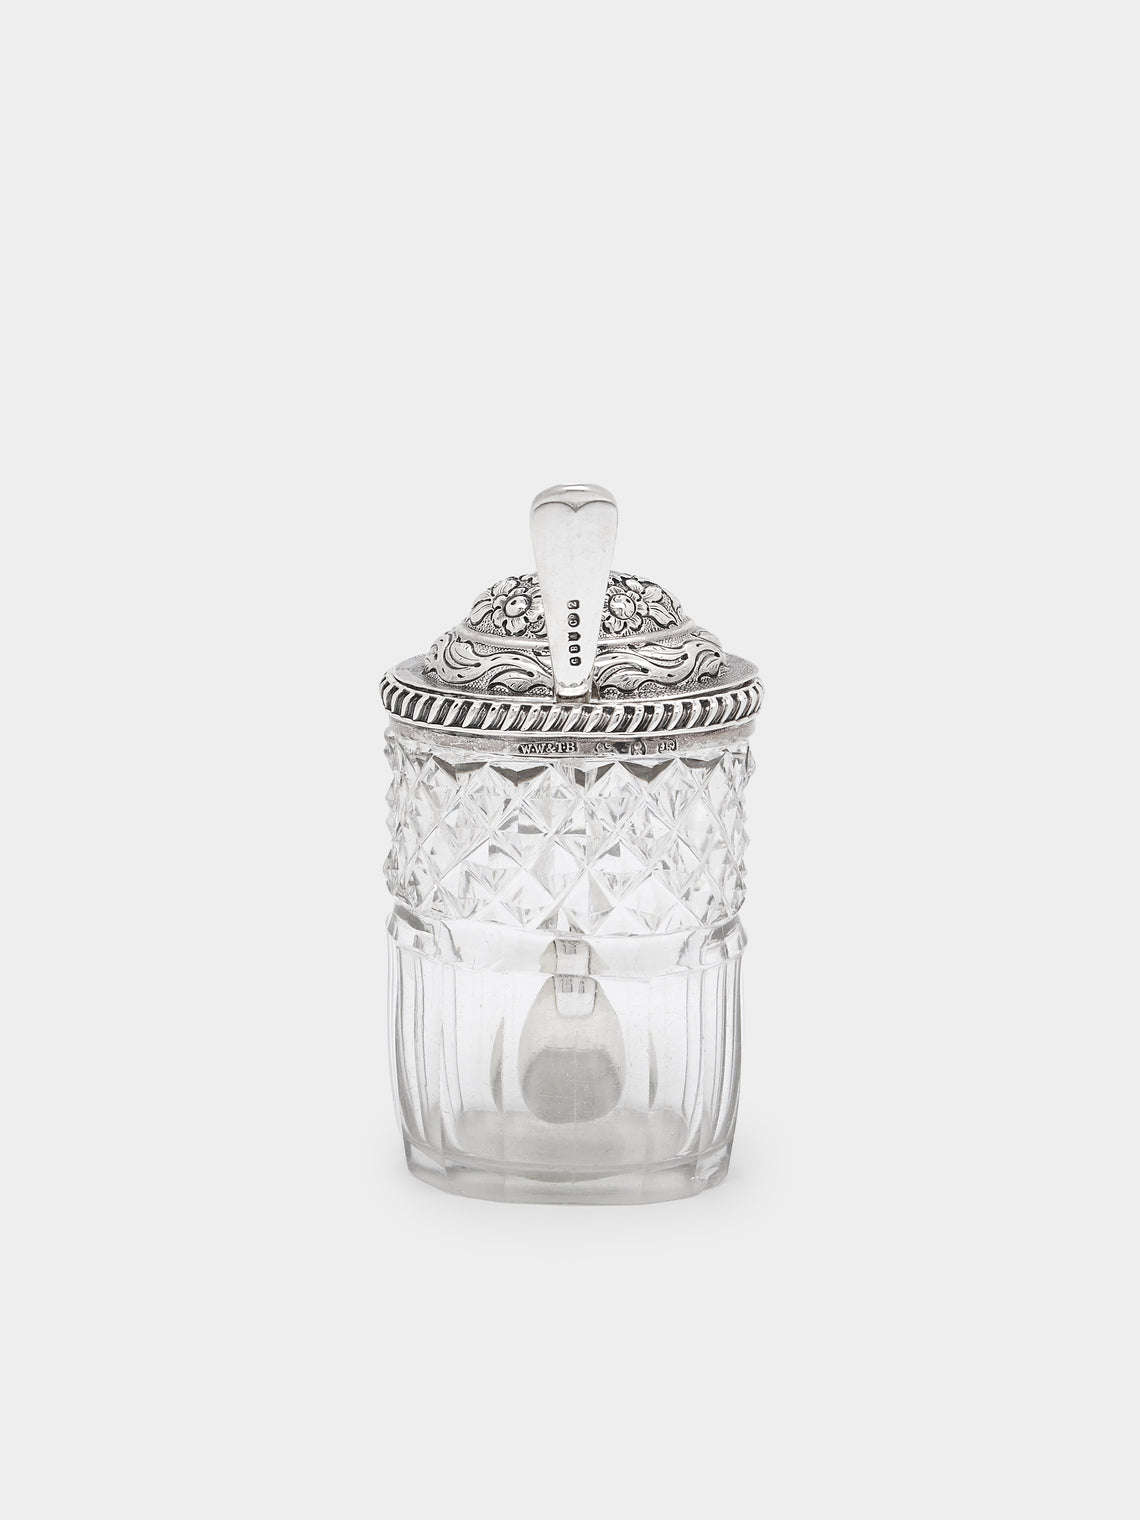 Antique and Vintage - 1900s Silver and Glass Jar -  - ABASK - 